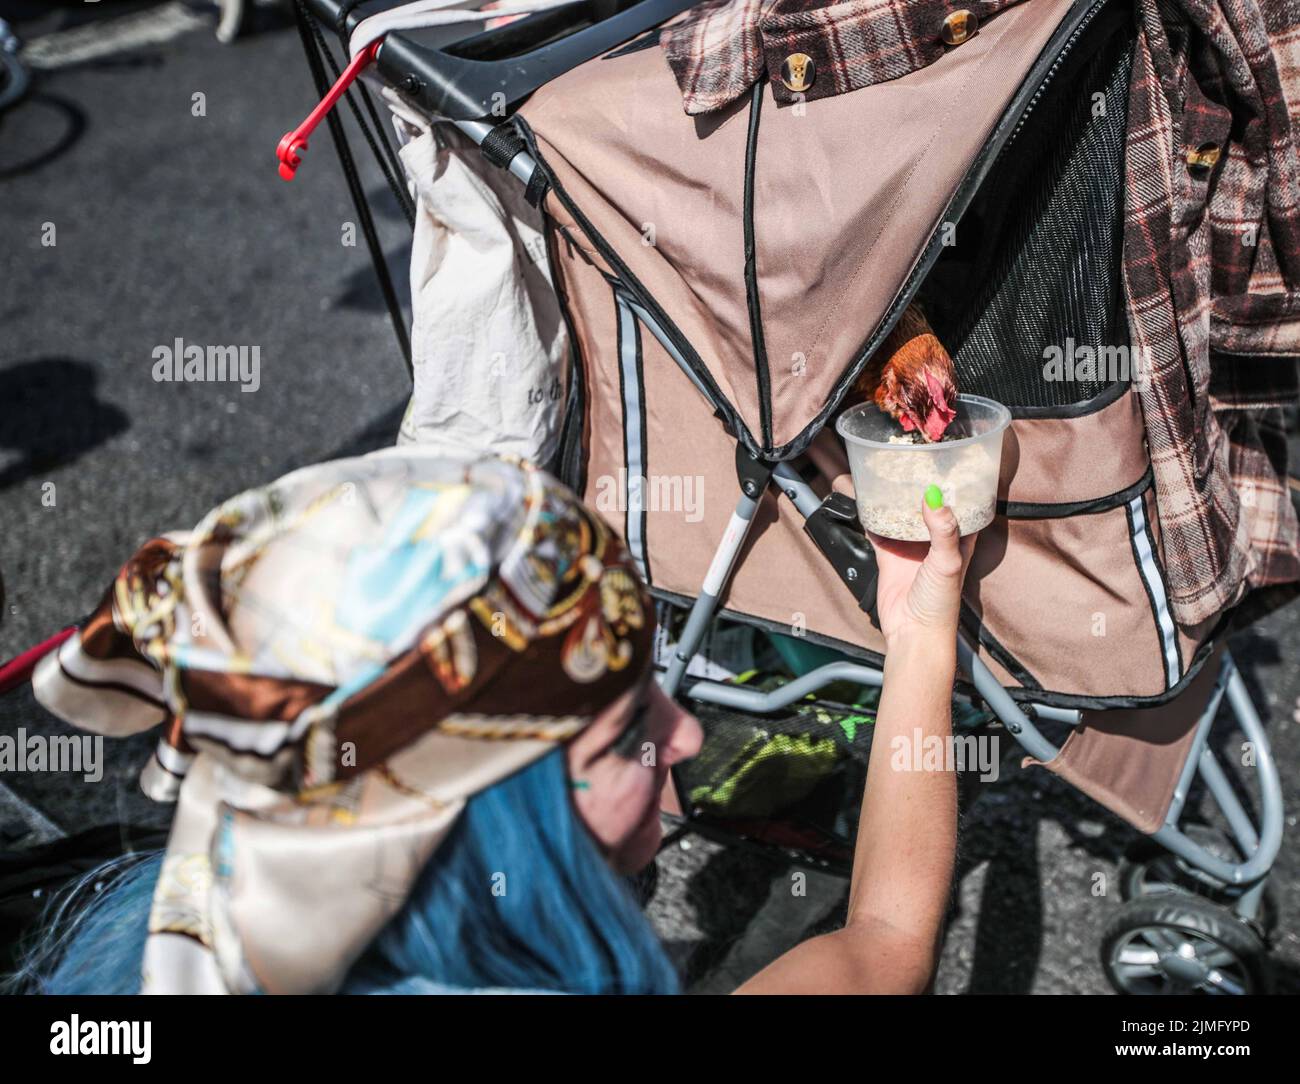 London UK 06.Aug 2022 A. chicken been pushed in a push chair is giving food and water by a woman who took part in todays rally Rights for Animals in Central London  Paul Quezada-Neiman/Alamy Live News Stock Photo